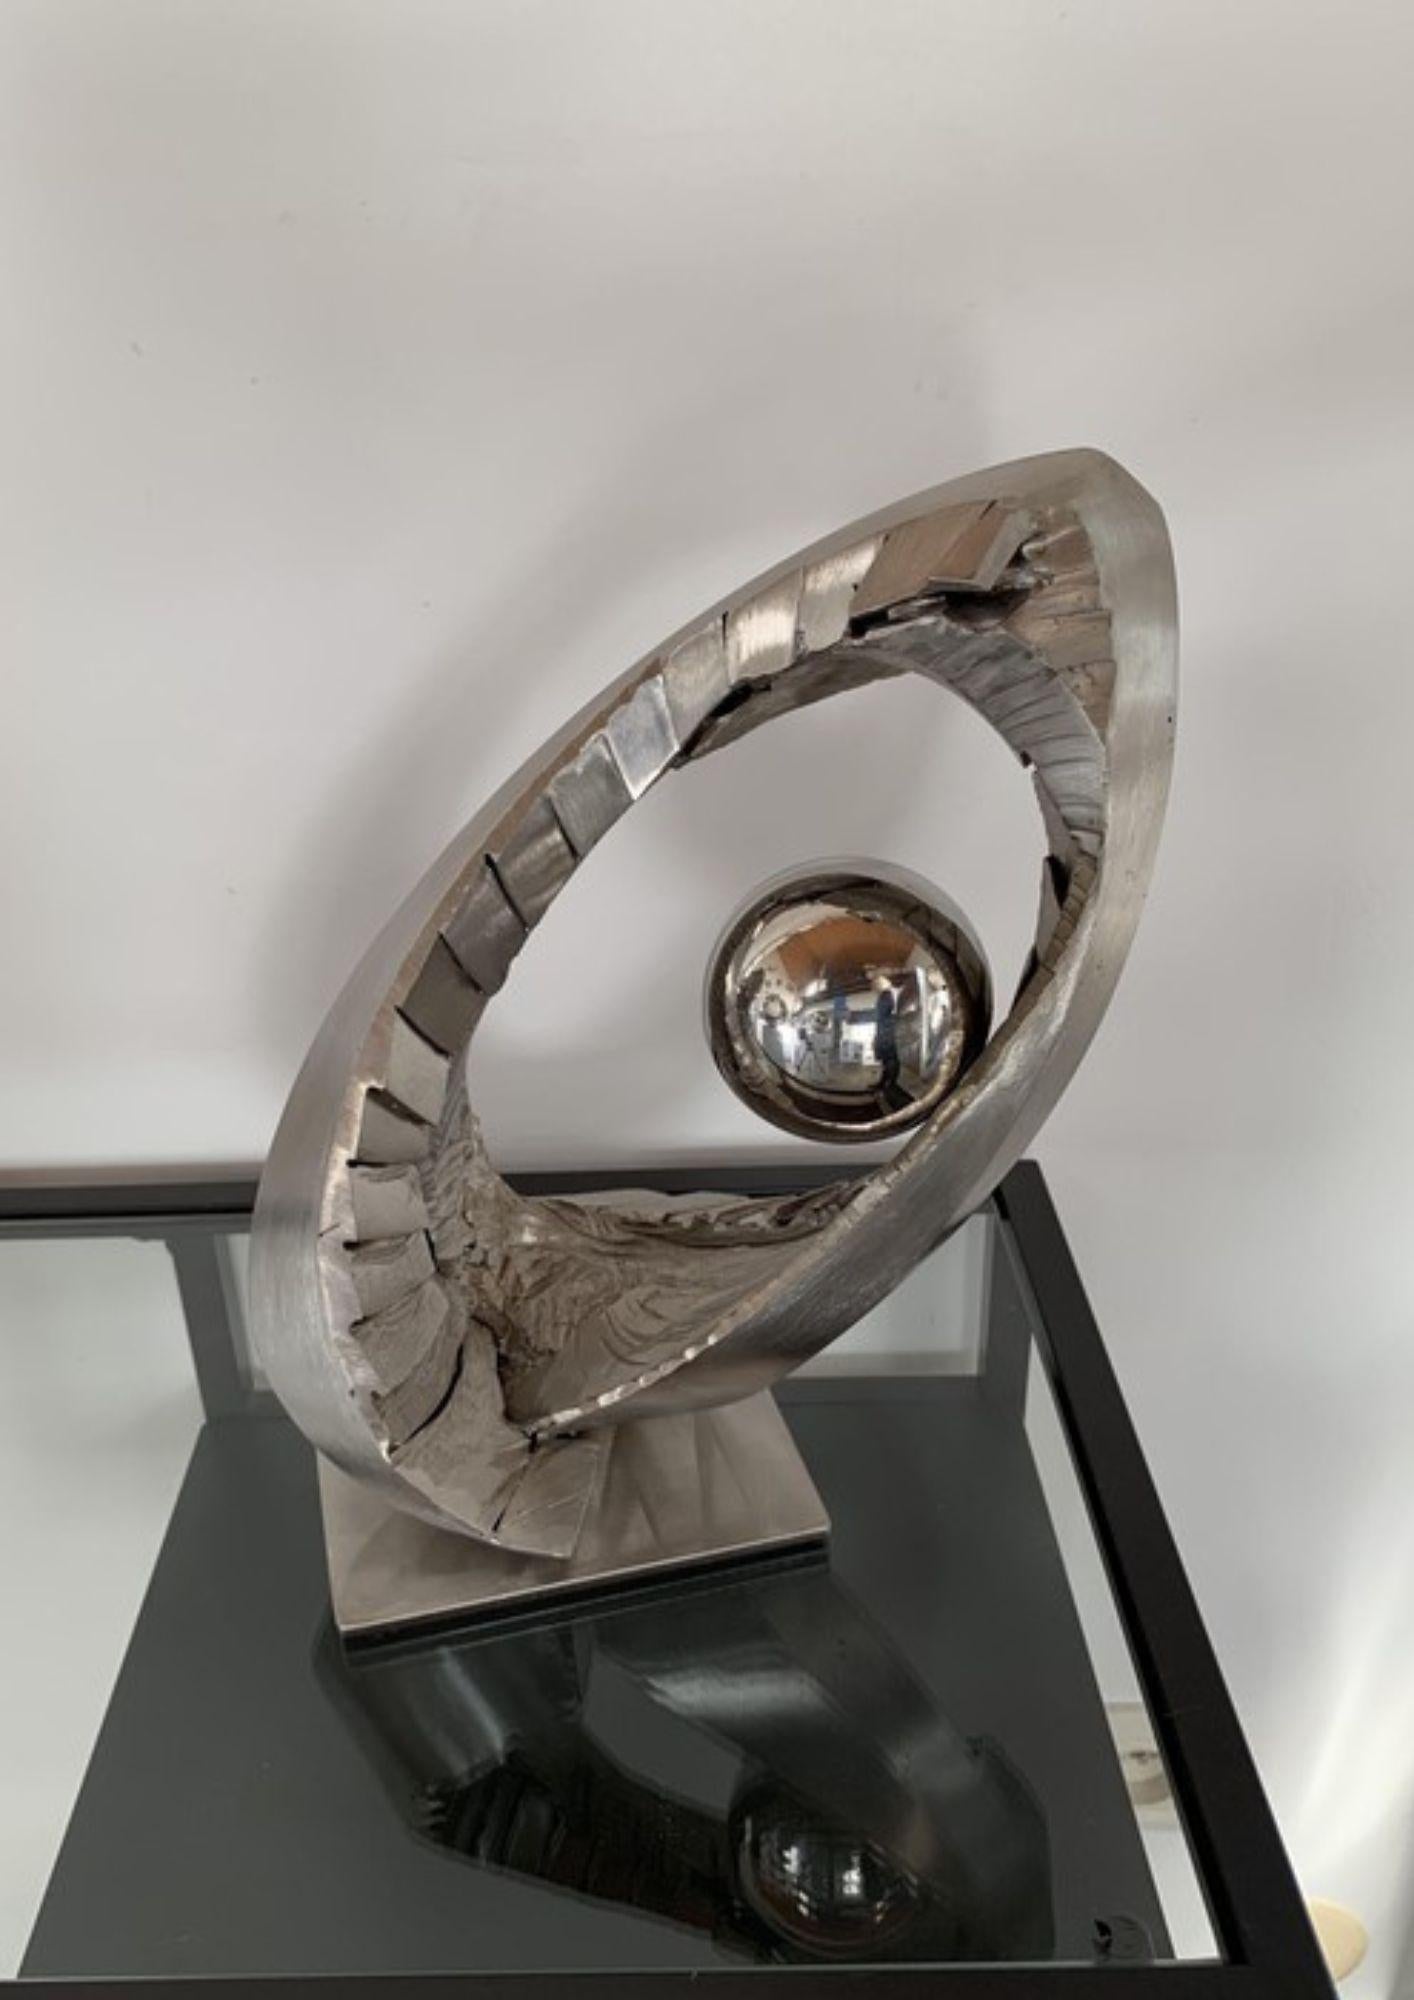 The Mobius 4 sculpture is a work that explores the concepts of circulation, torsion and movement through the Möbius ring. The artist draws inspiration from this fascinating mathematical figure to give life to a sculpture that embodies the infinite